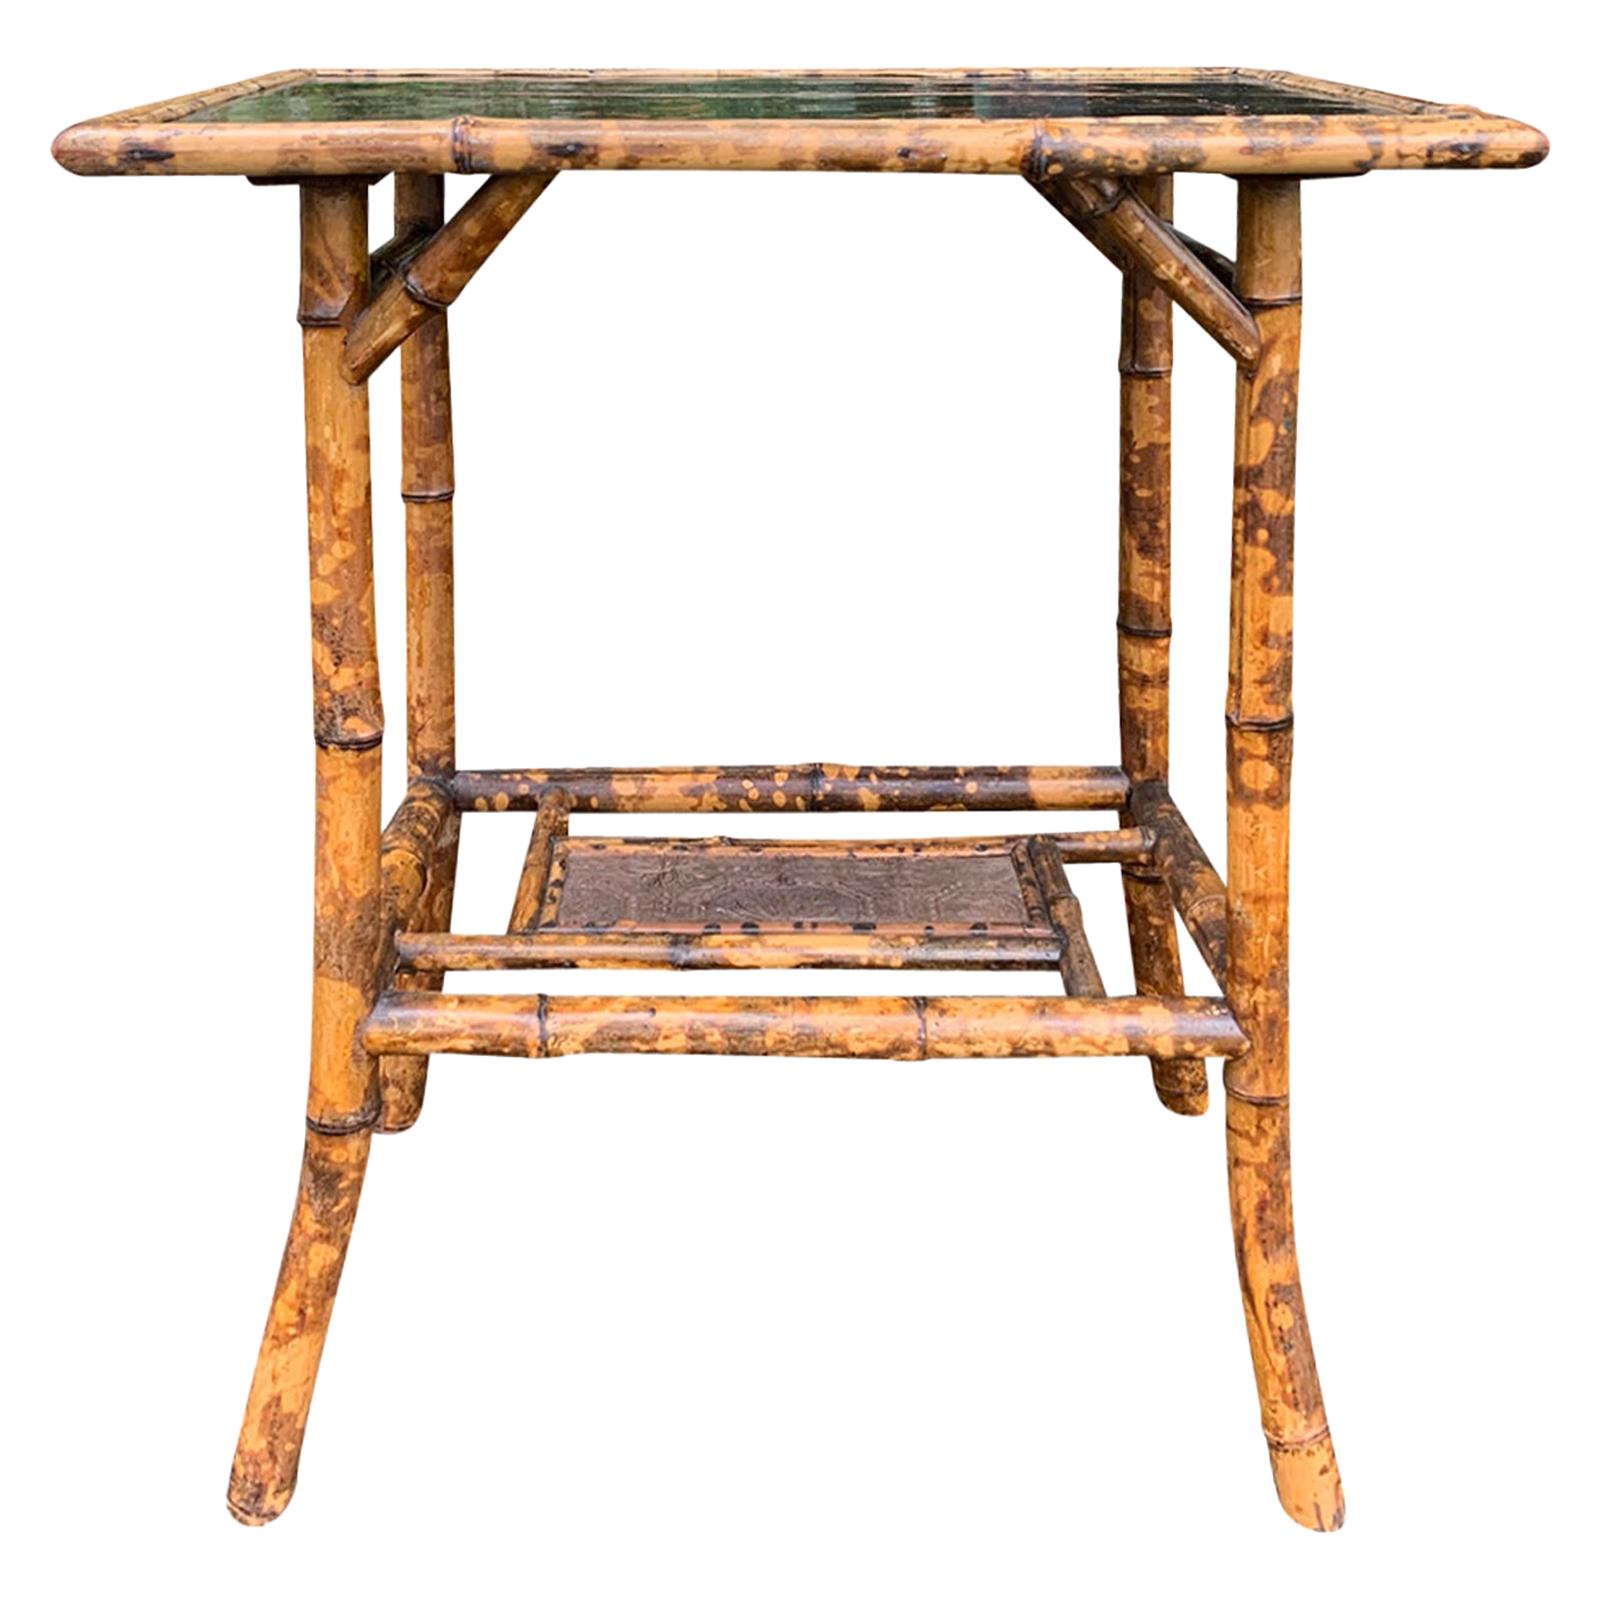 Late 19th-Early 20th Century English Bamboo and Lacquered Chinoiserie Side Table